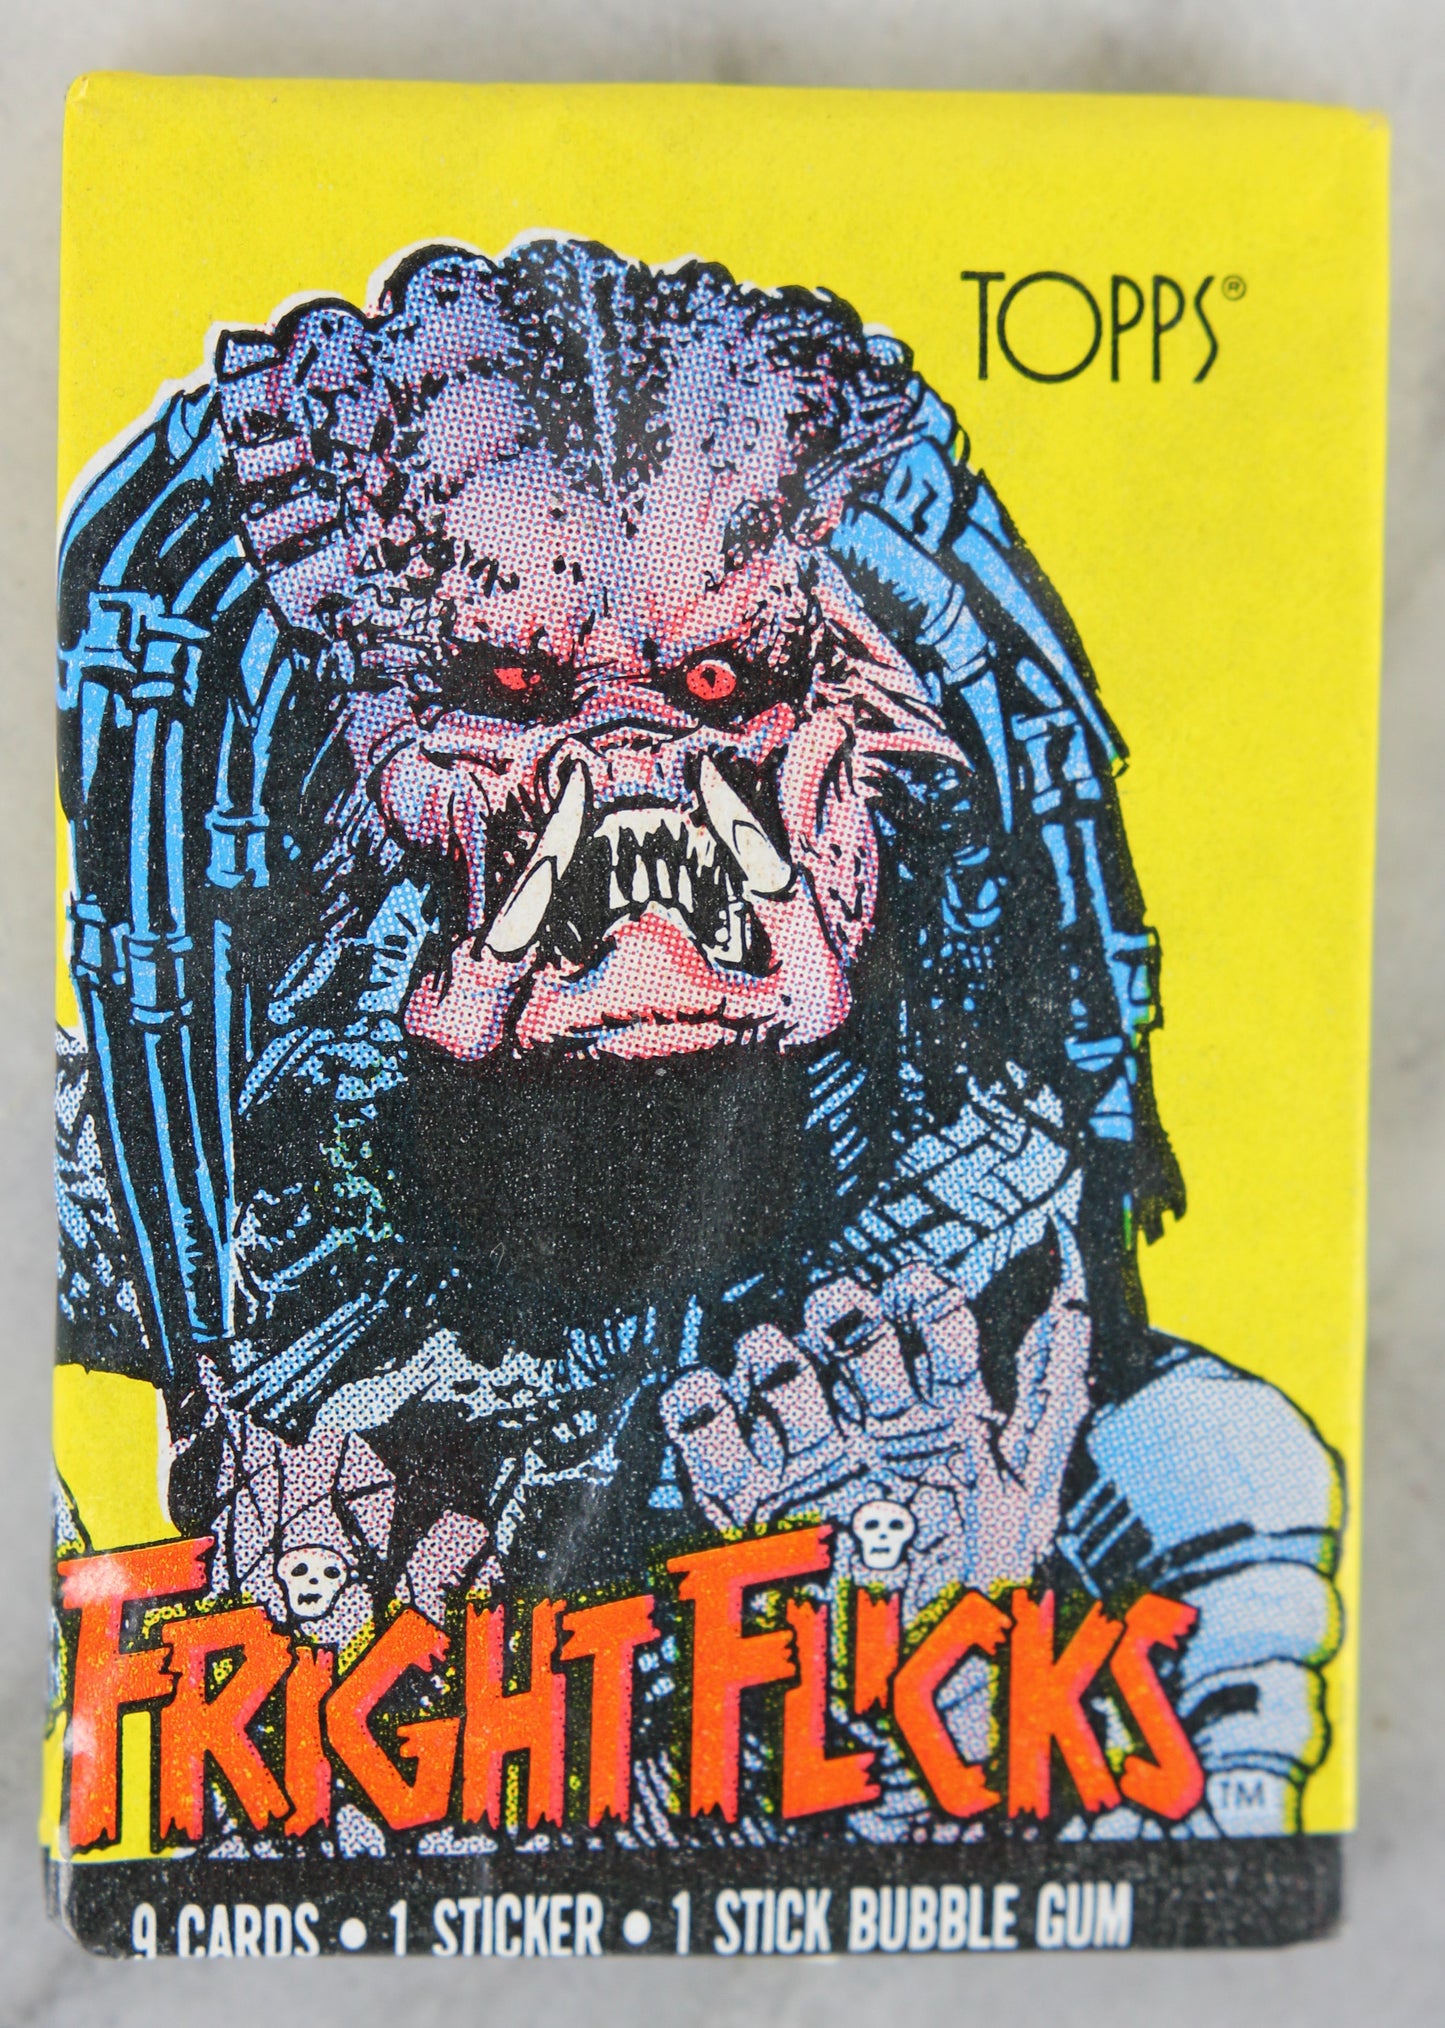 Topps Fright Flicks Collectible Trading Cards, One Wax Pack, Predator, 1988